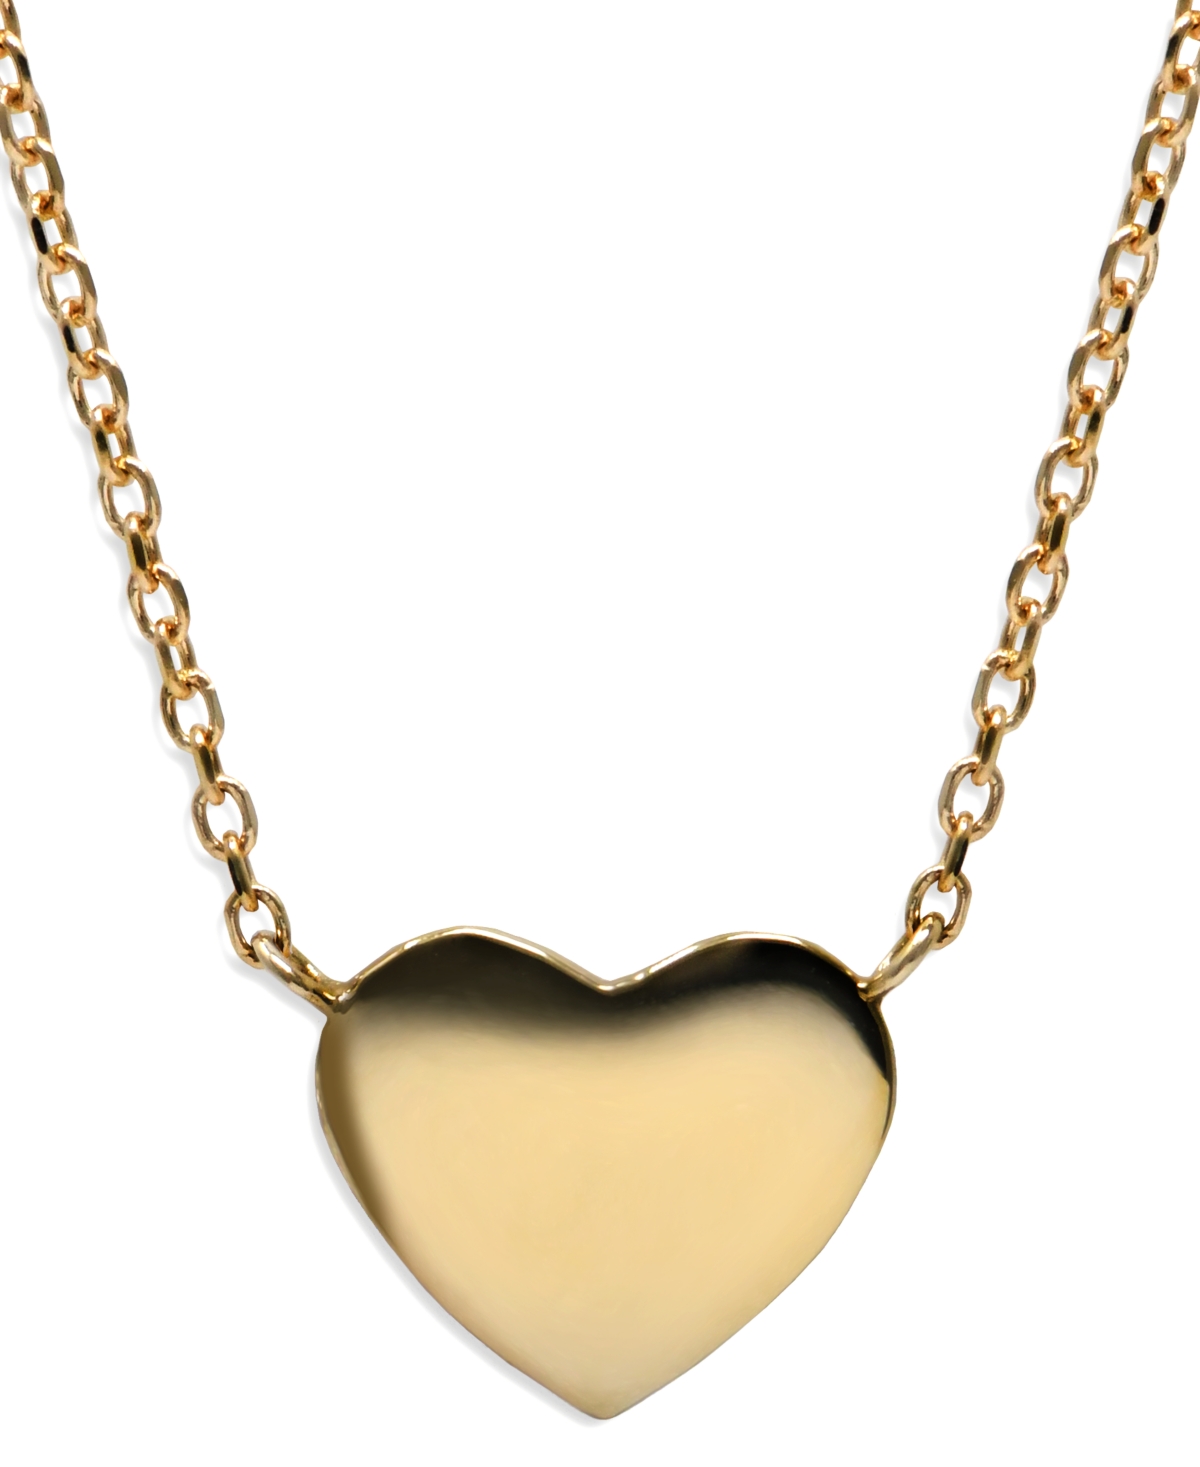 Jac+Jo by Anzie Polished Heart Pendant Necklace in 14k Gold, 16" + 1" extender - Gold